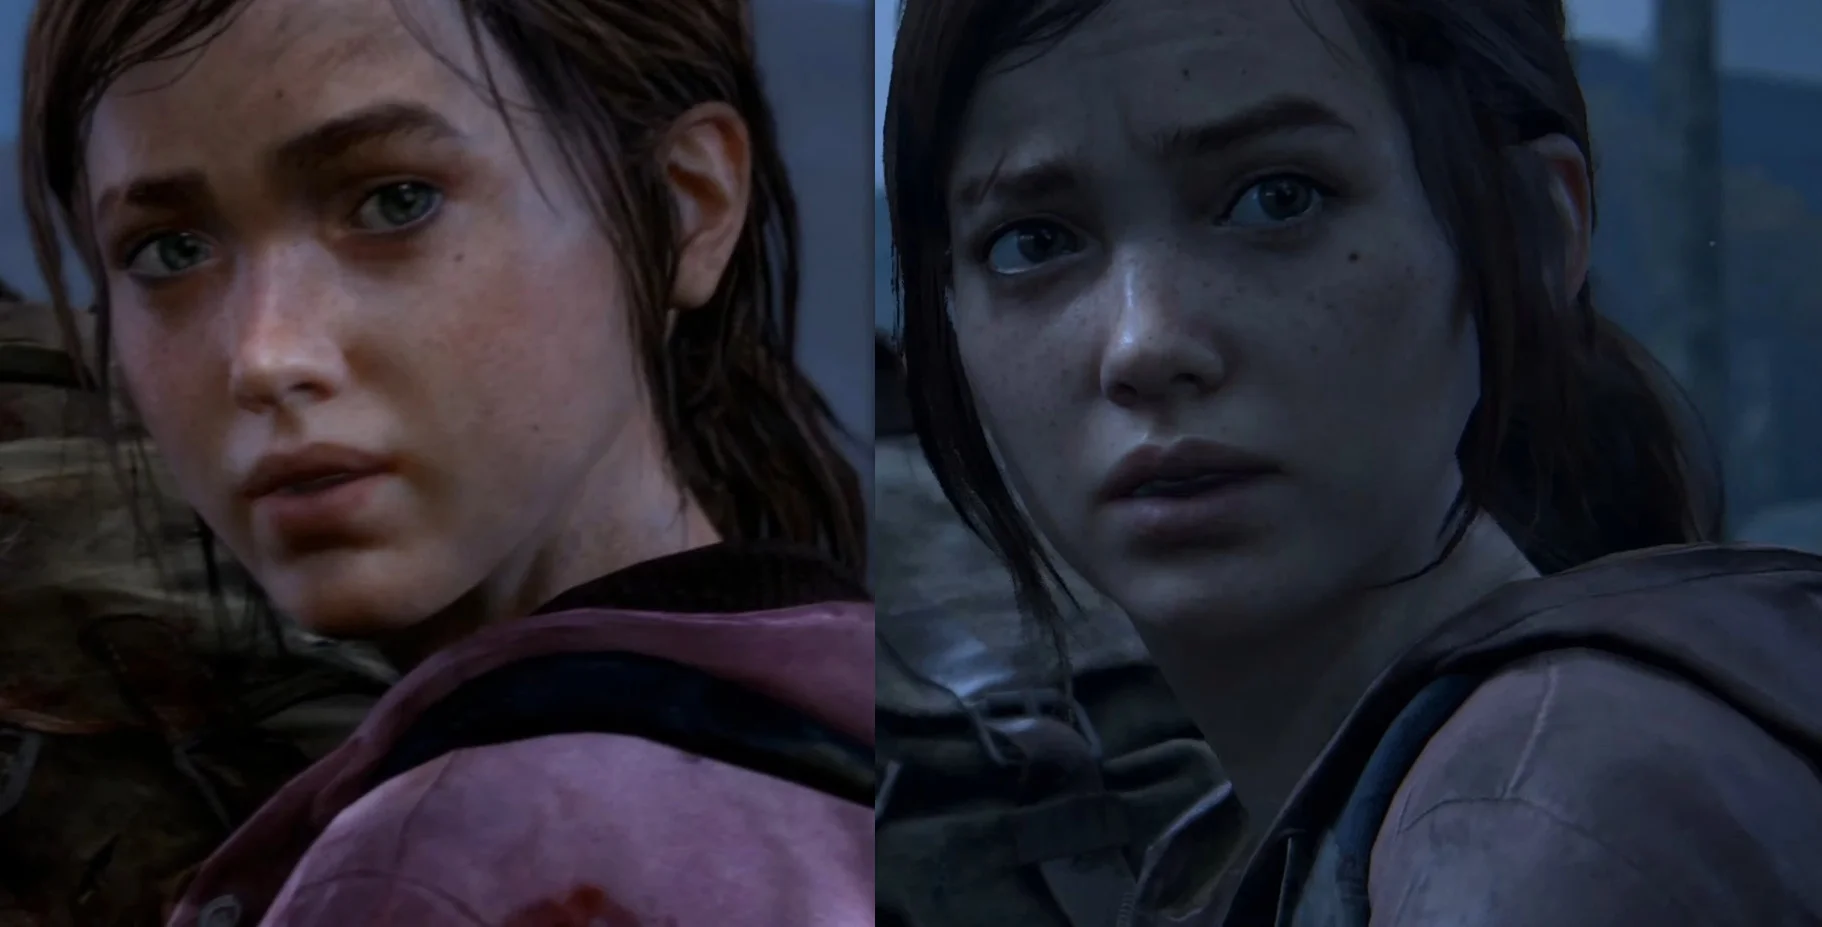 Last of us part 1 ps5. Элли the last of us 1 Remake. The last of us ремейк ps5. Плейстейшен 5 the last of us. Ремейк the last of us Part 2 ps5.